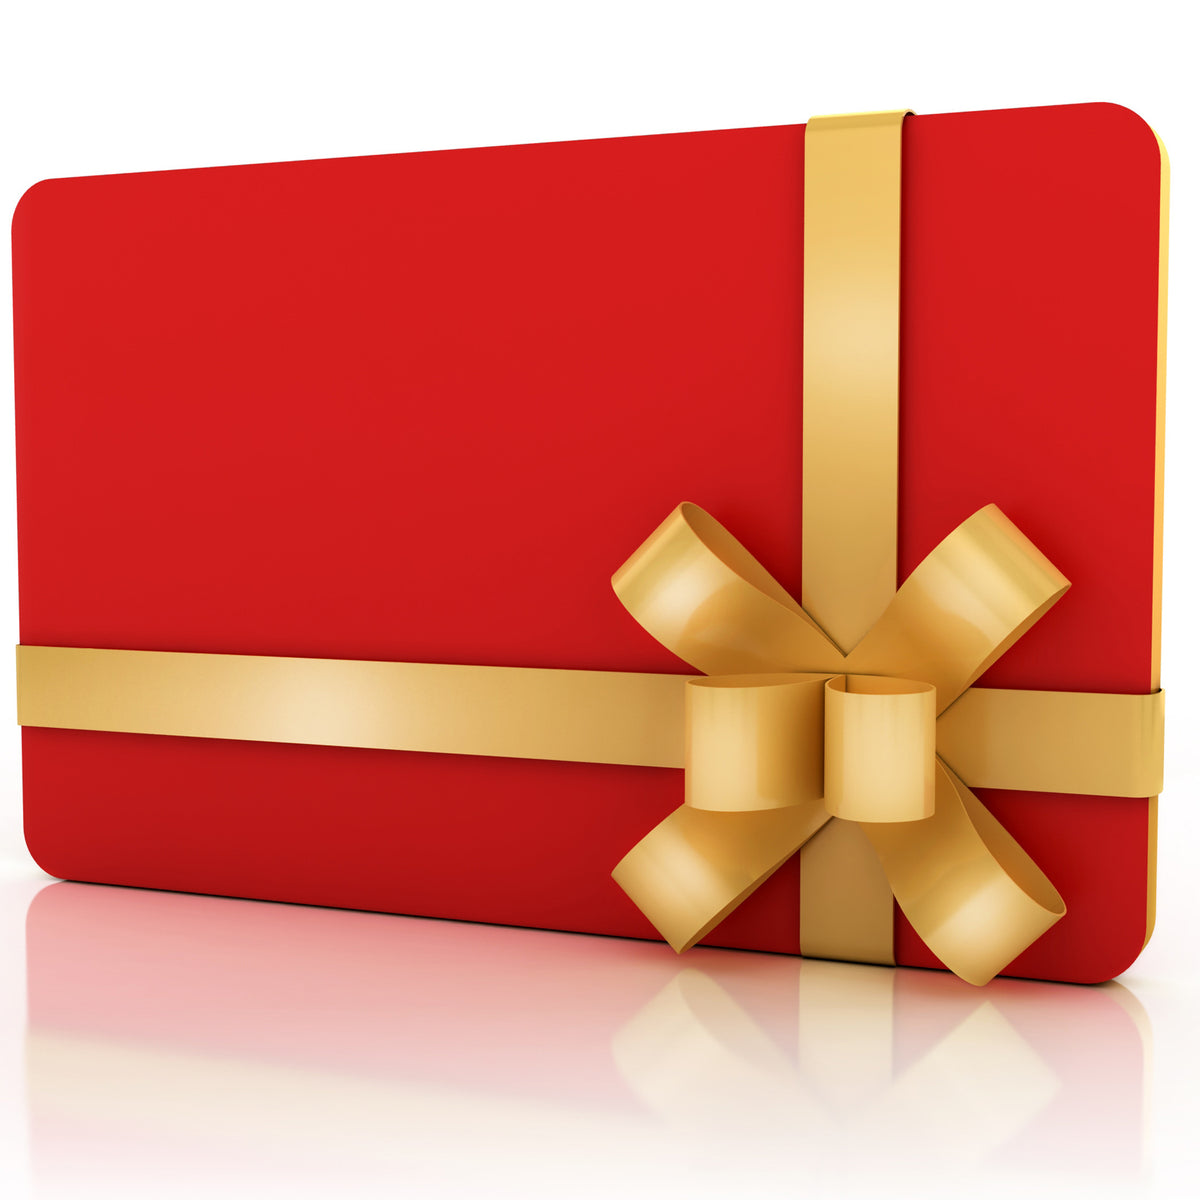 Picture of a red gift card wrapped with a golden bow